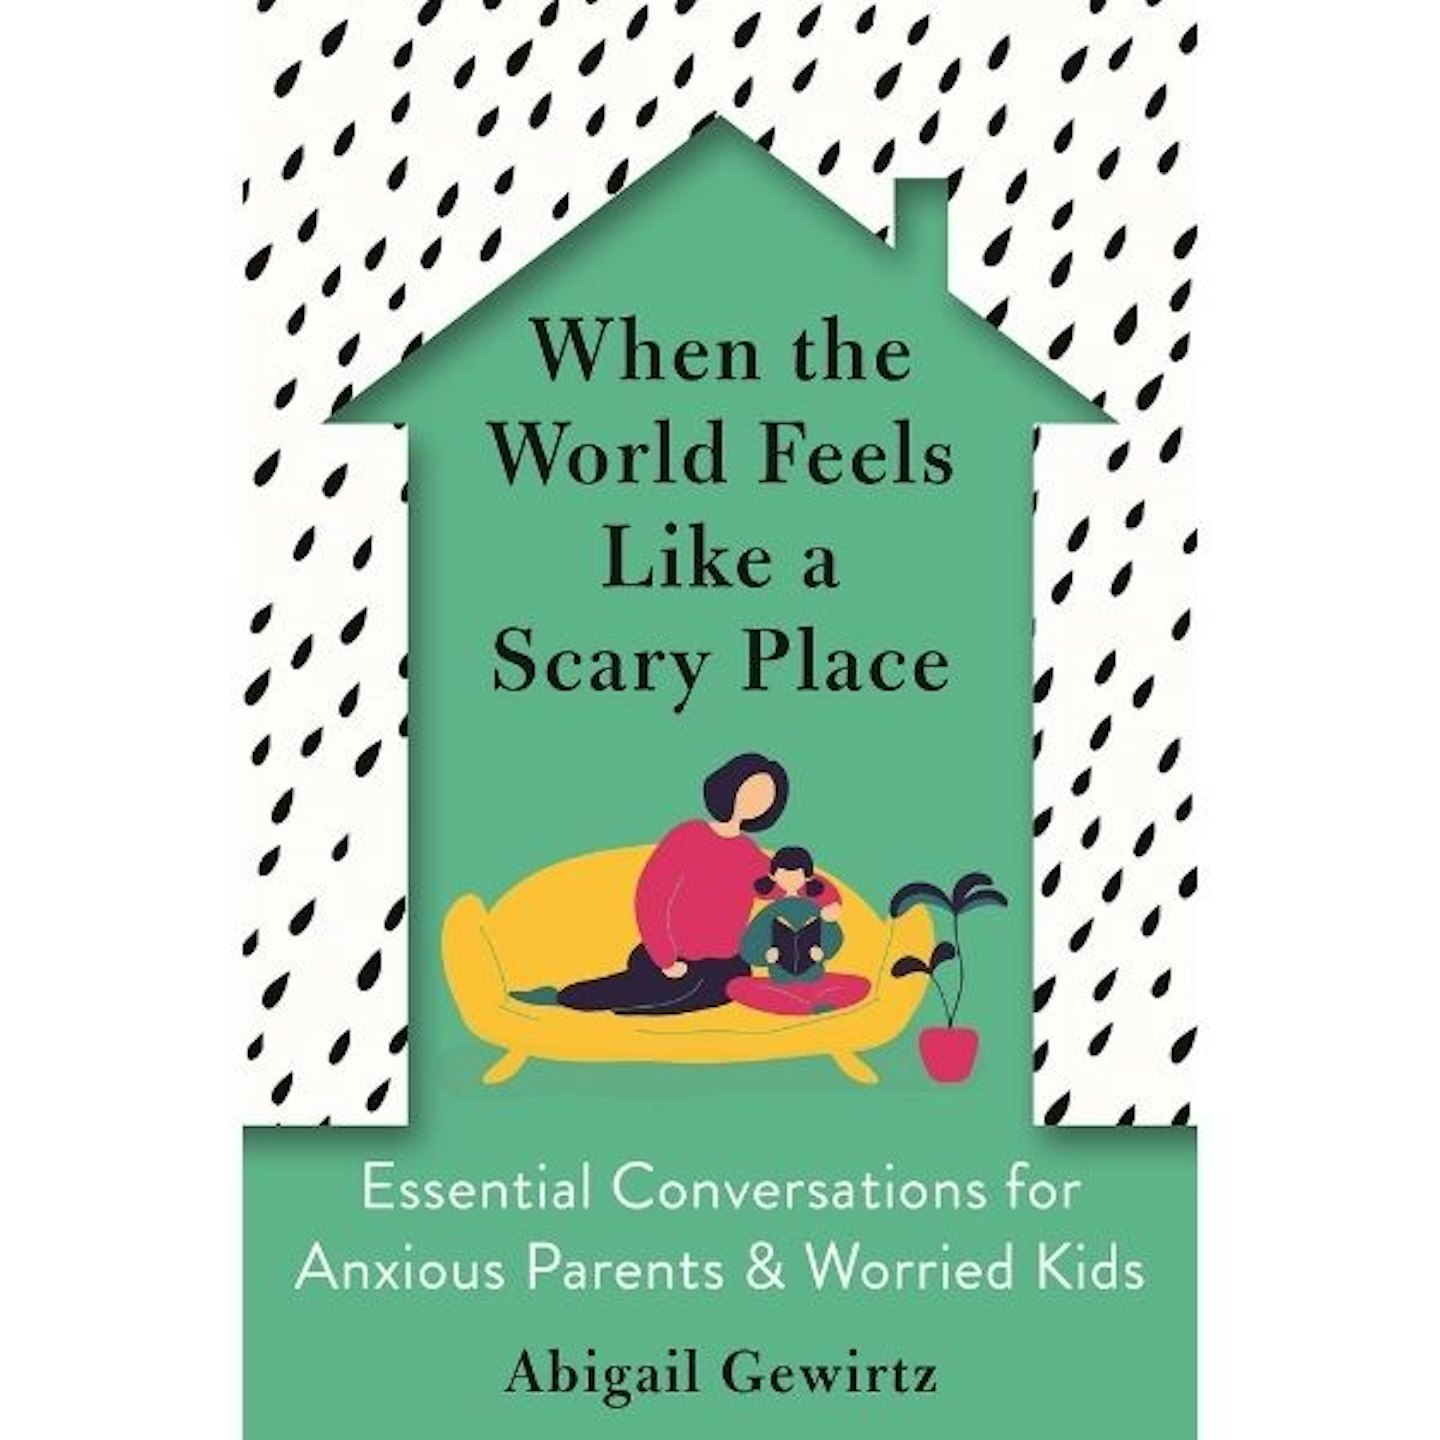 When The World Feels Like A Scary Place, By Abigail Gewirtz